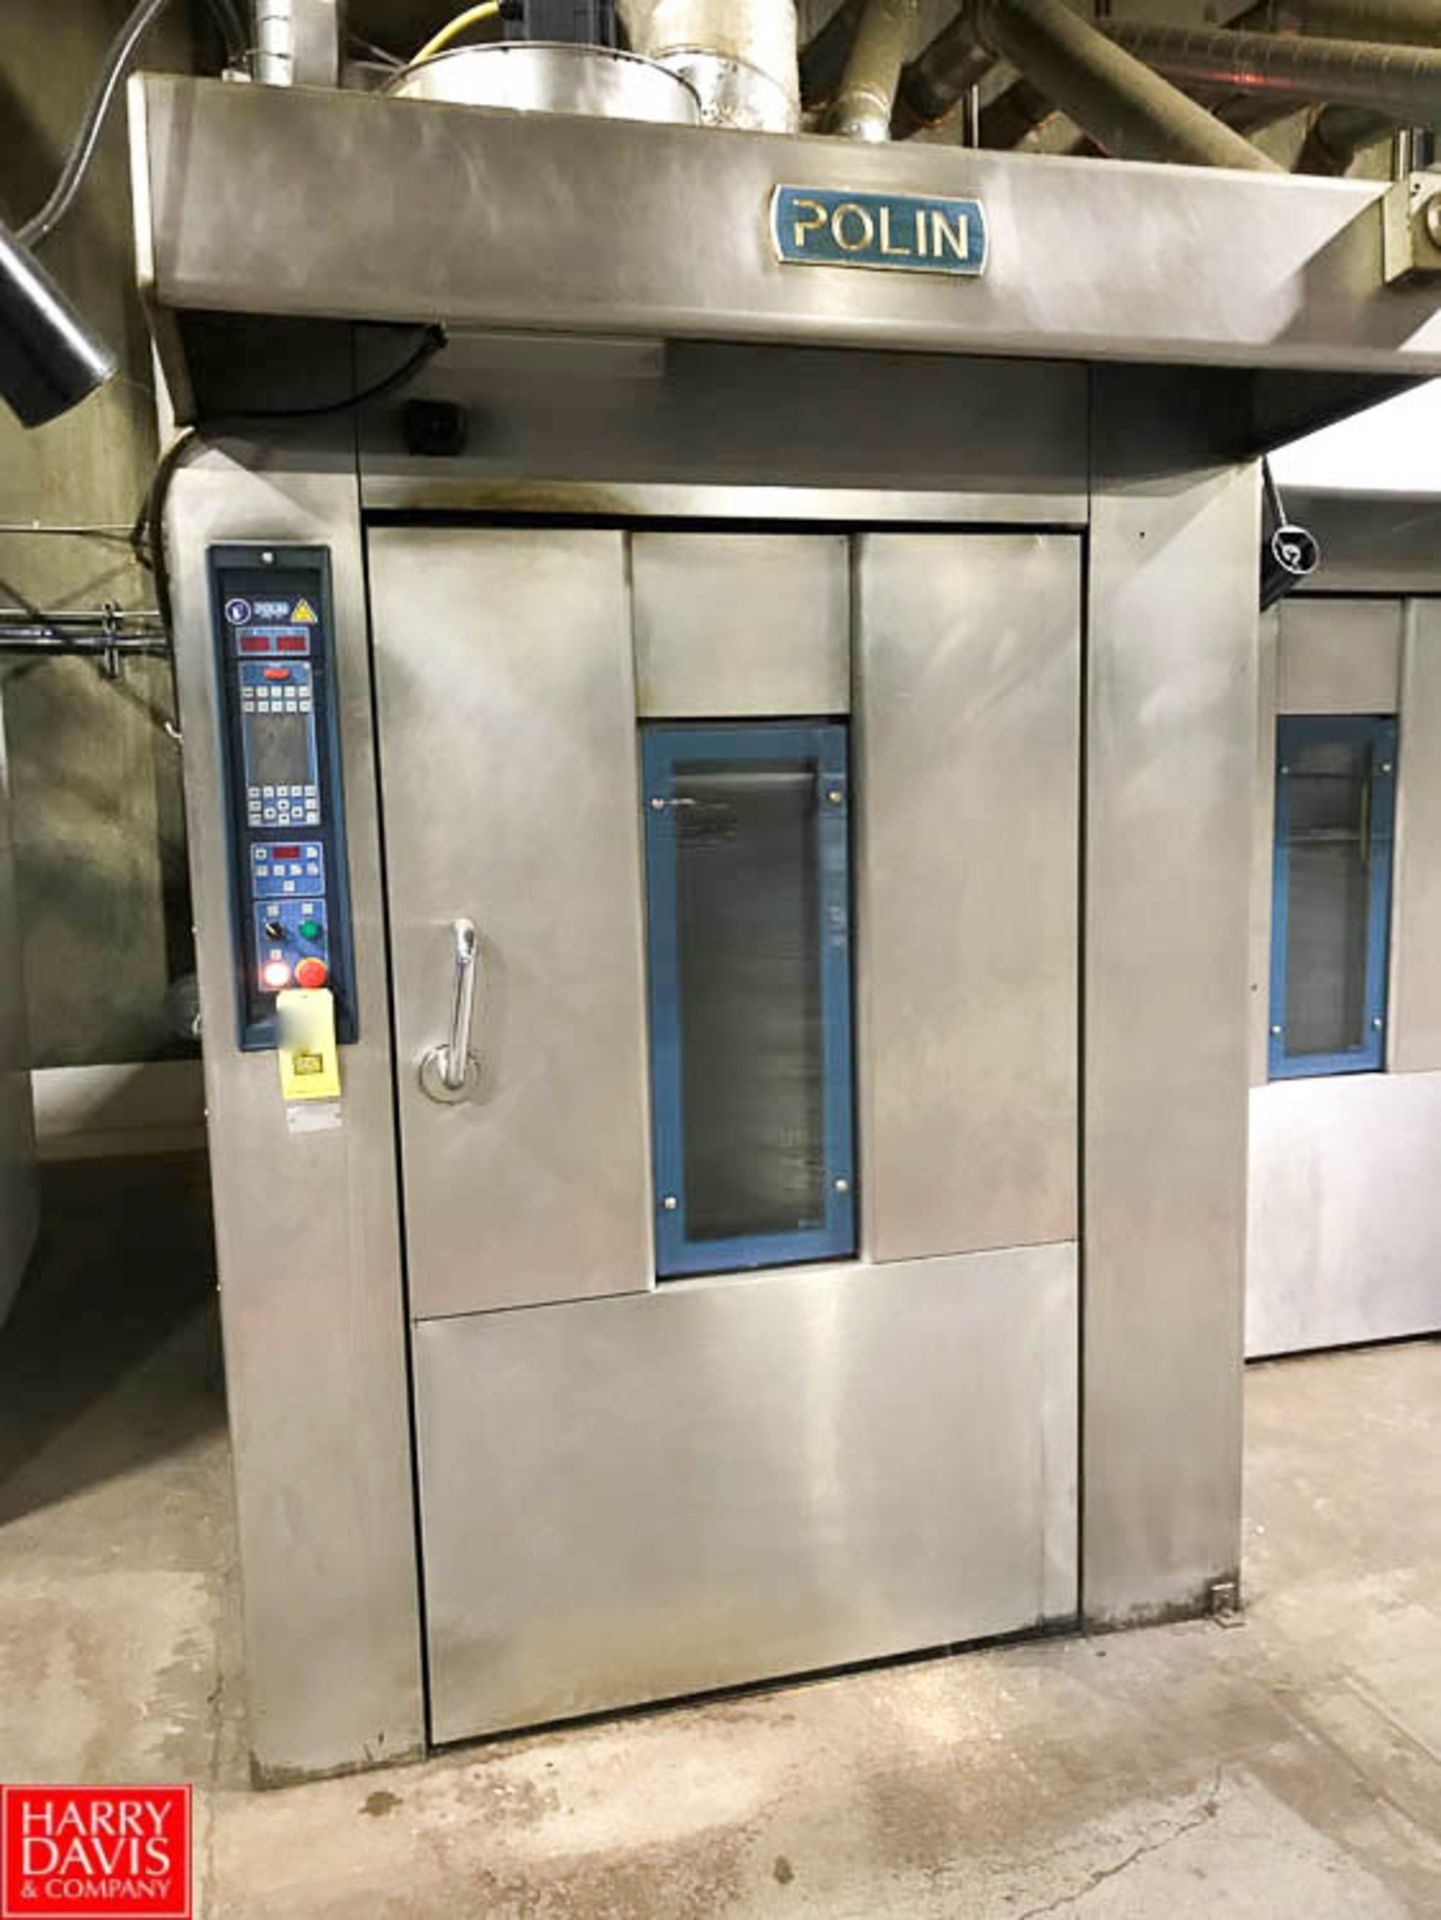 Polin ROTO AVANT Double Rack Rotating Gas-Fired Oven, Model: ROTO 8095'200 SC, S/N: A606107/AM/1868,